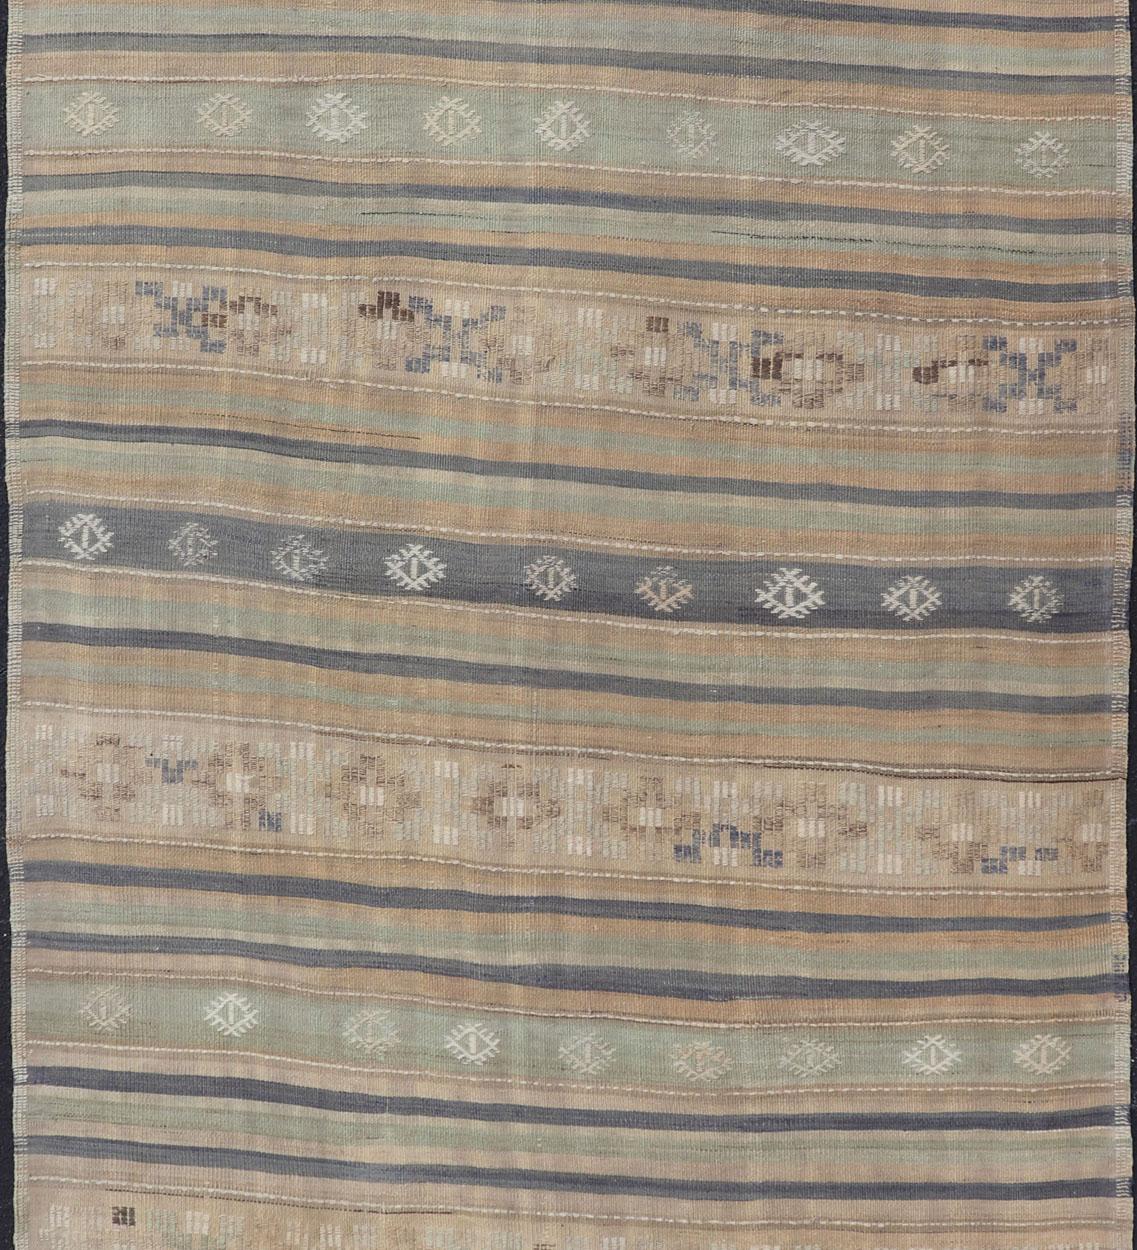 Vintage Hand Woven Turkish Kilim with Stripes in Light Taupe and Neutral Colors For Sale 3